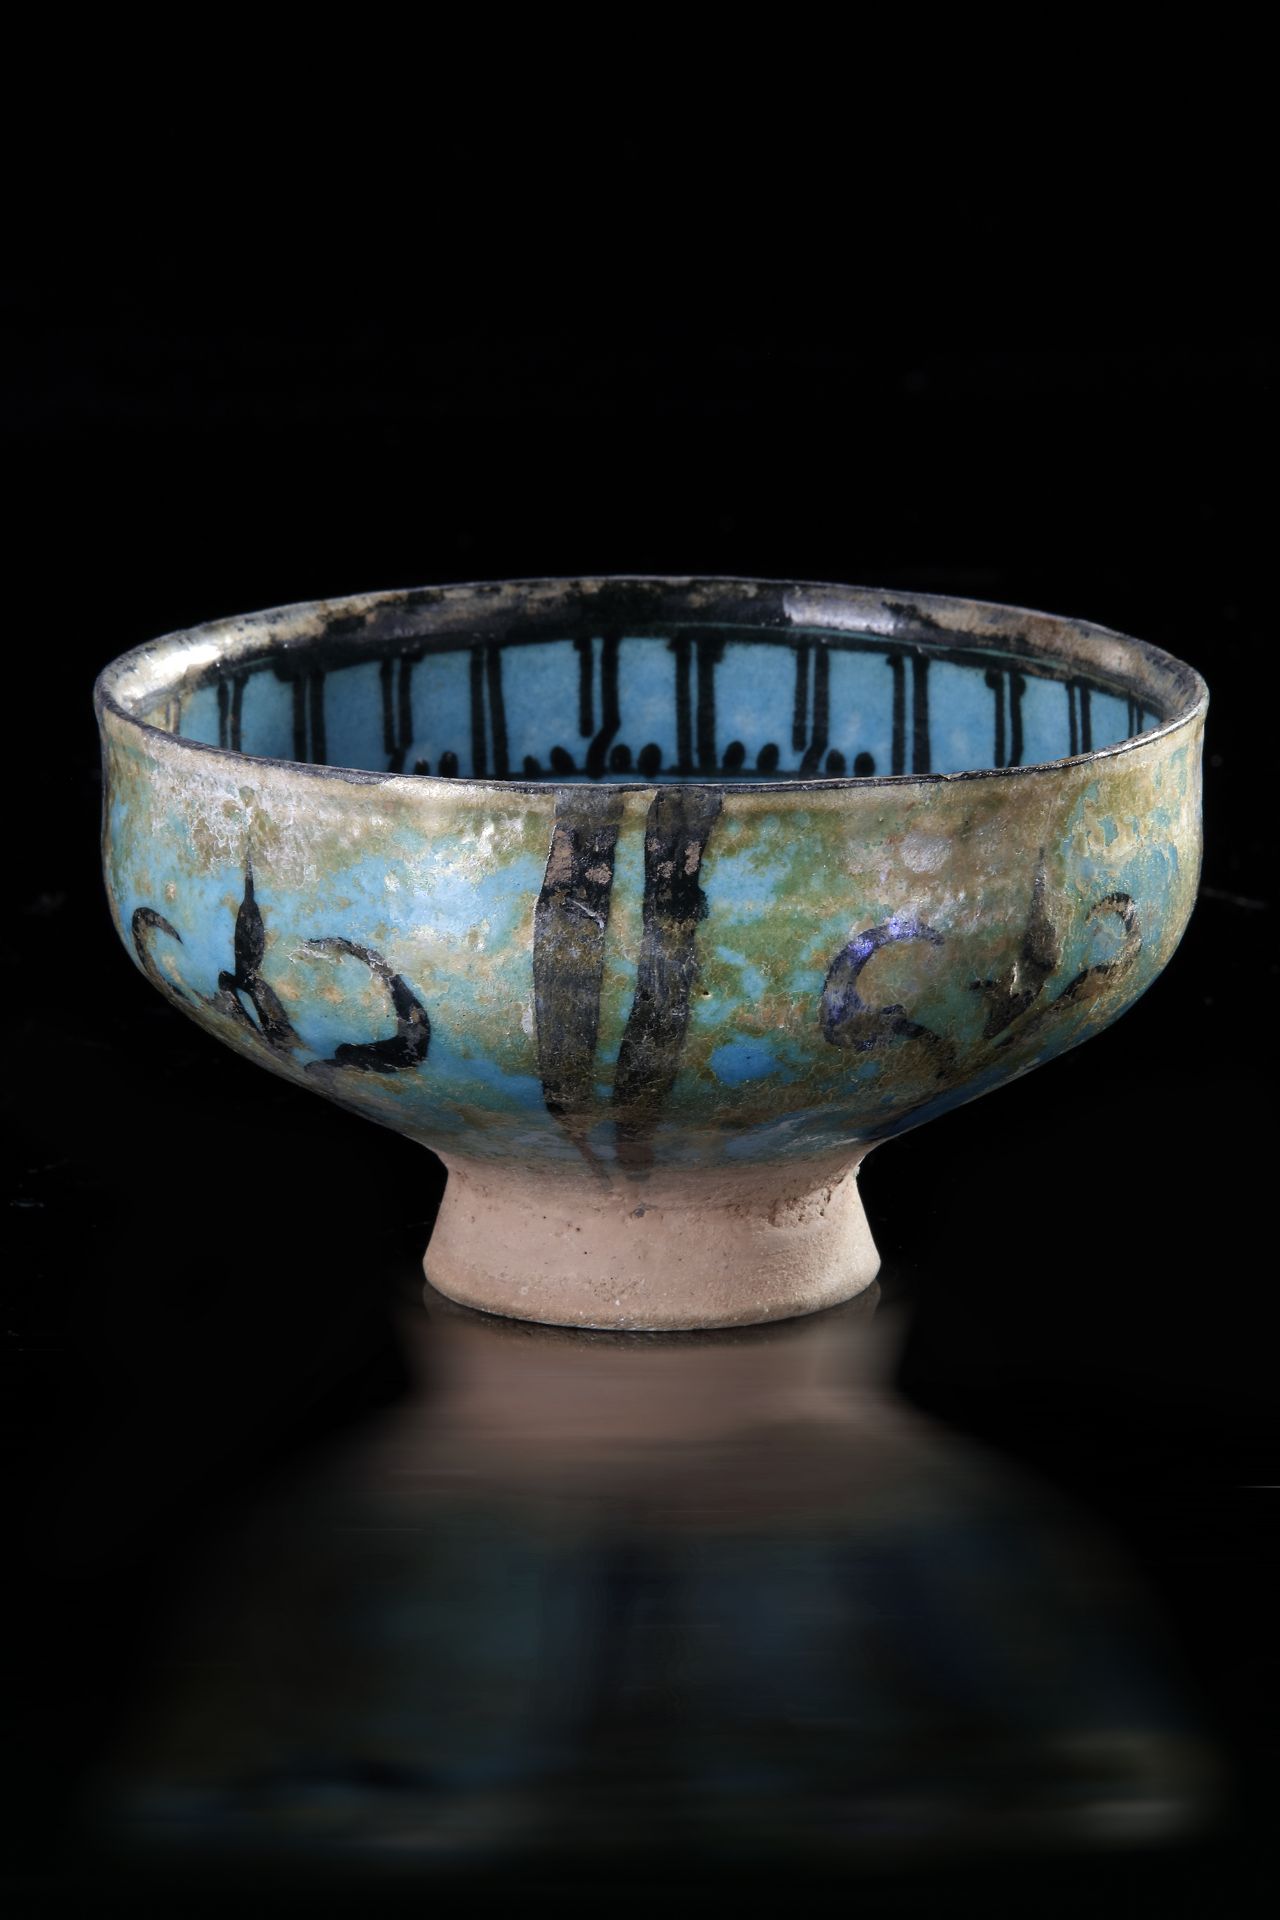 A KASHAN TURQUOISE AND BLACK DECORATED BOWL, PERSIA, 13TH CENTURY - Image 3 of 4